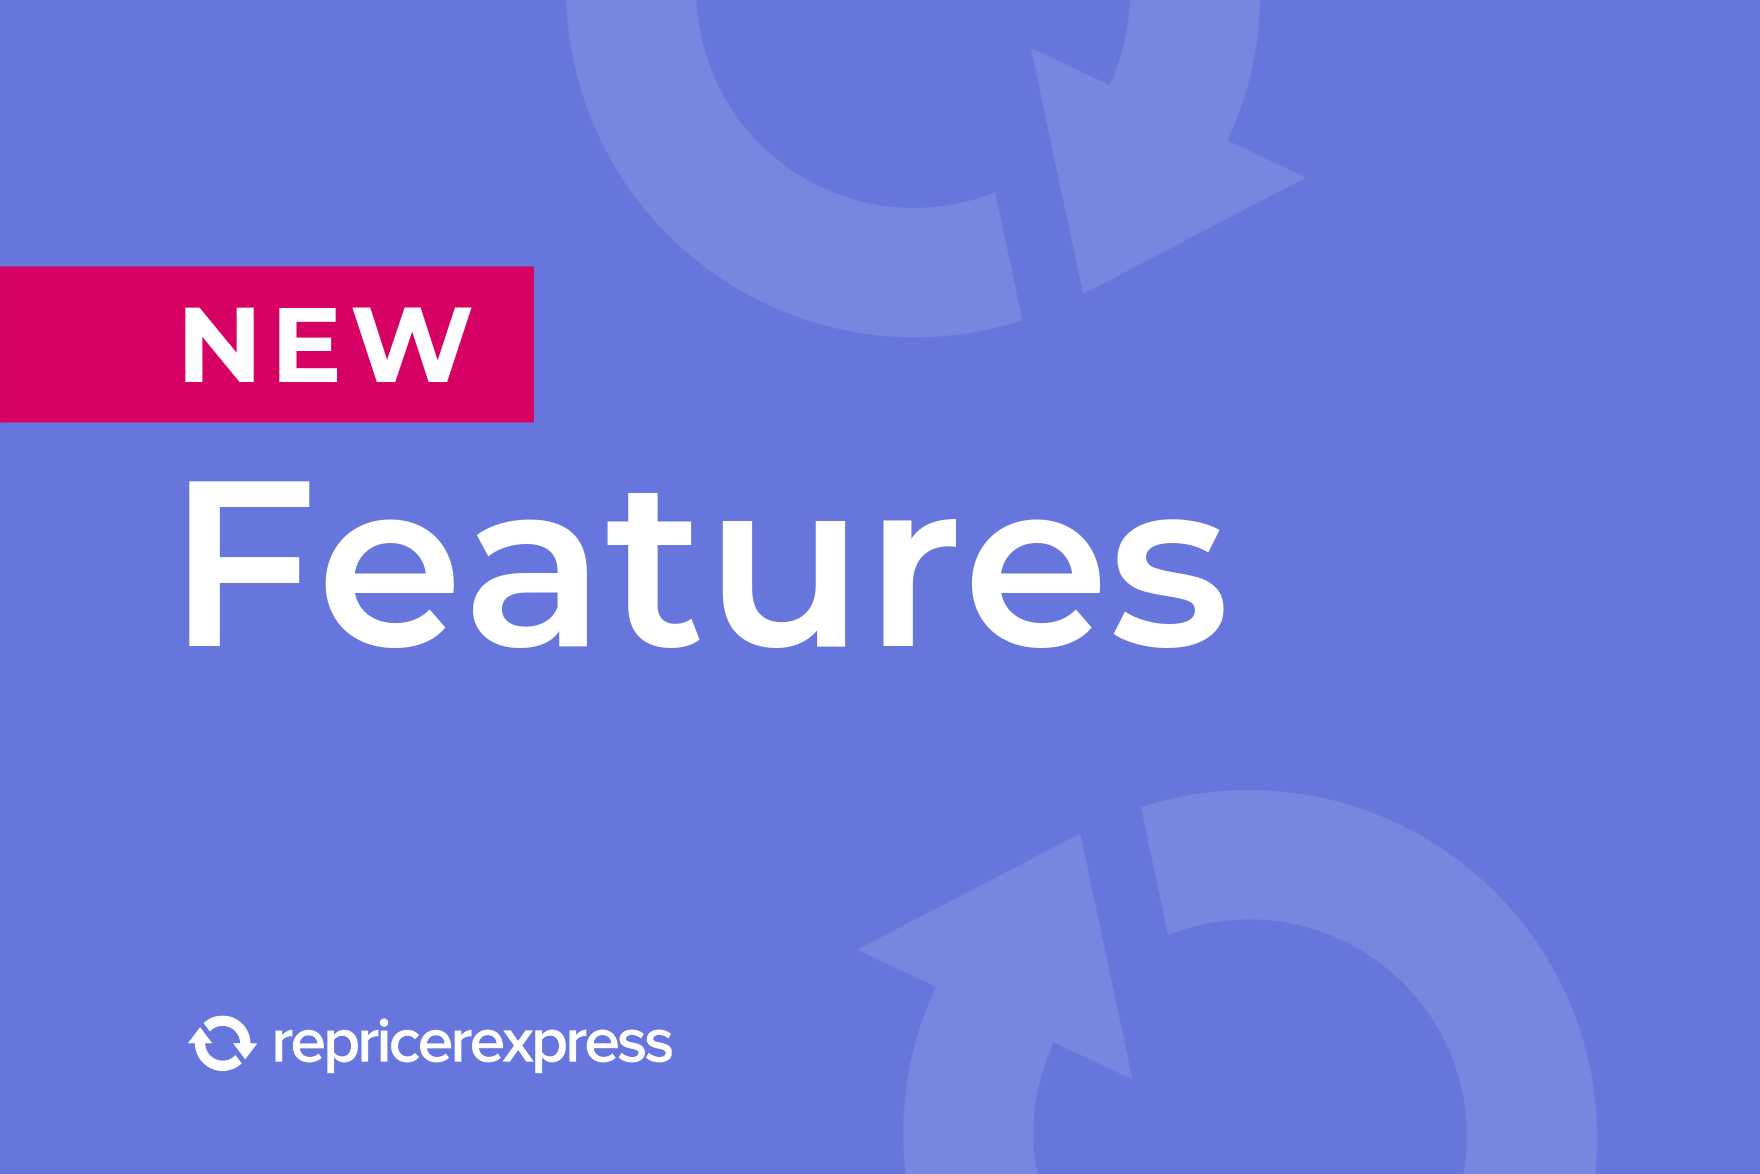 New features